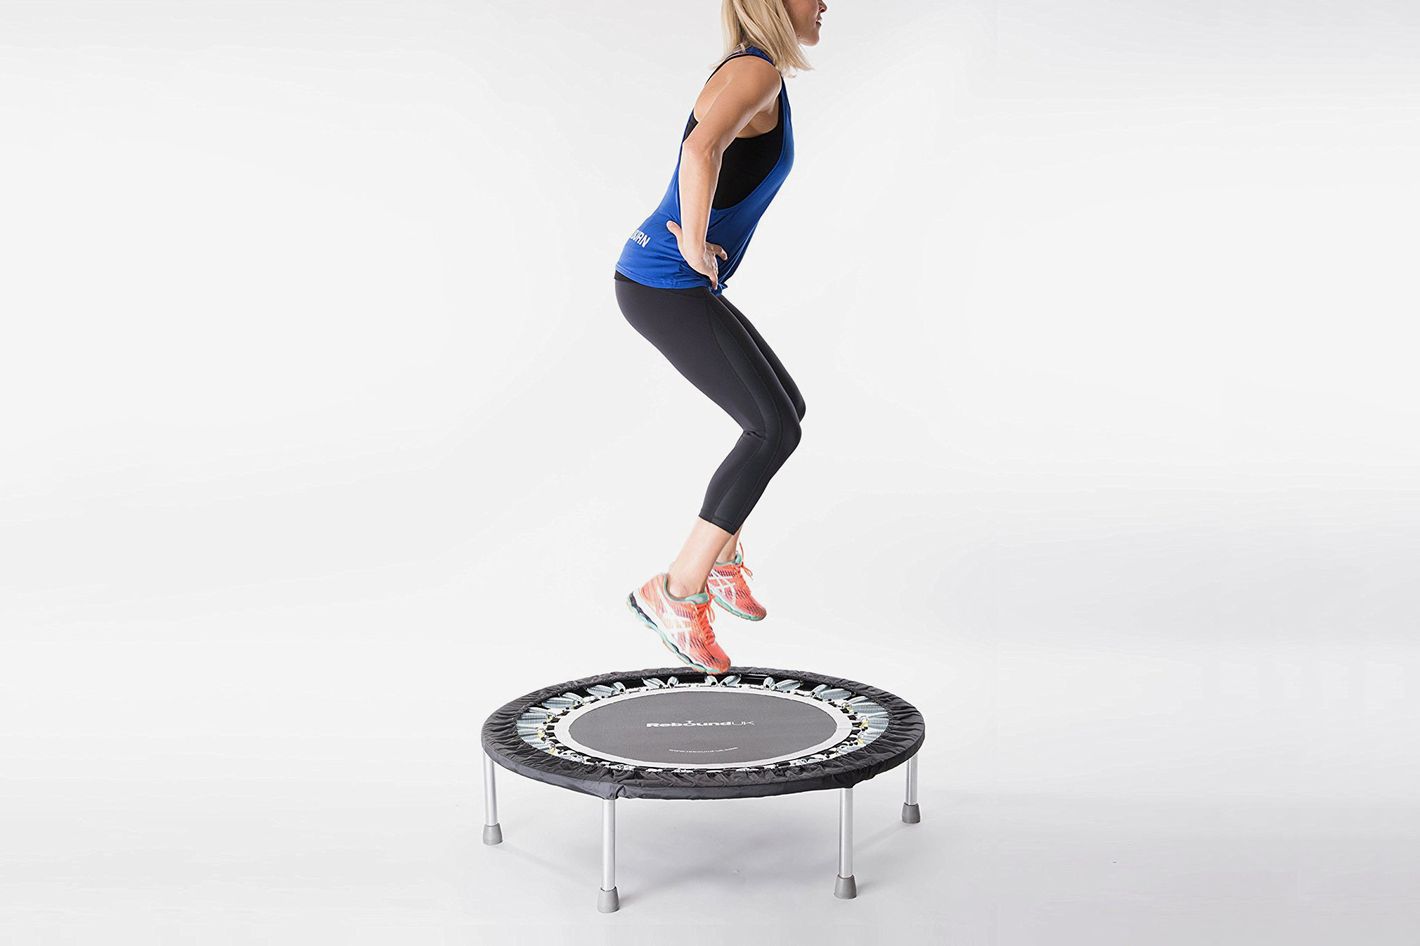 30 Minute Urban Rebounder Workout Reviews with Comfort Workout Clothes